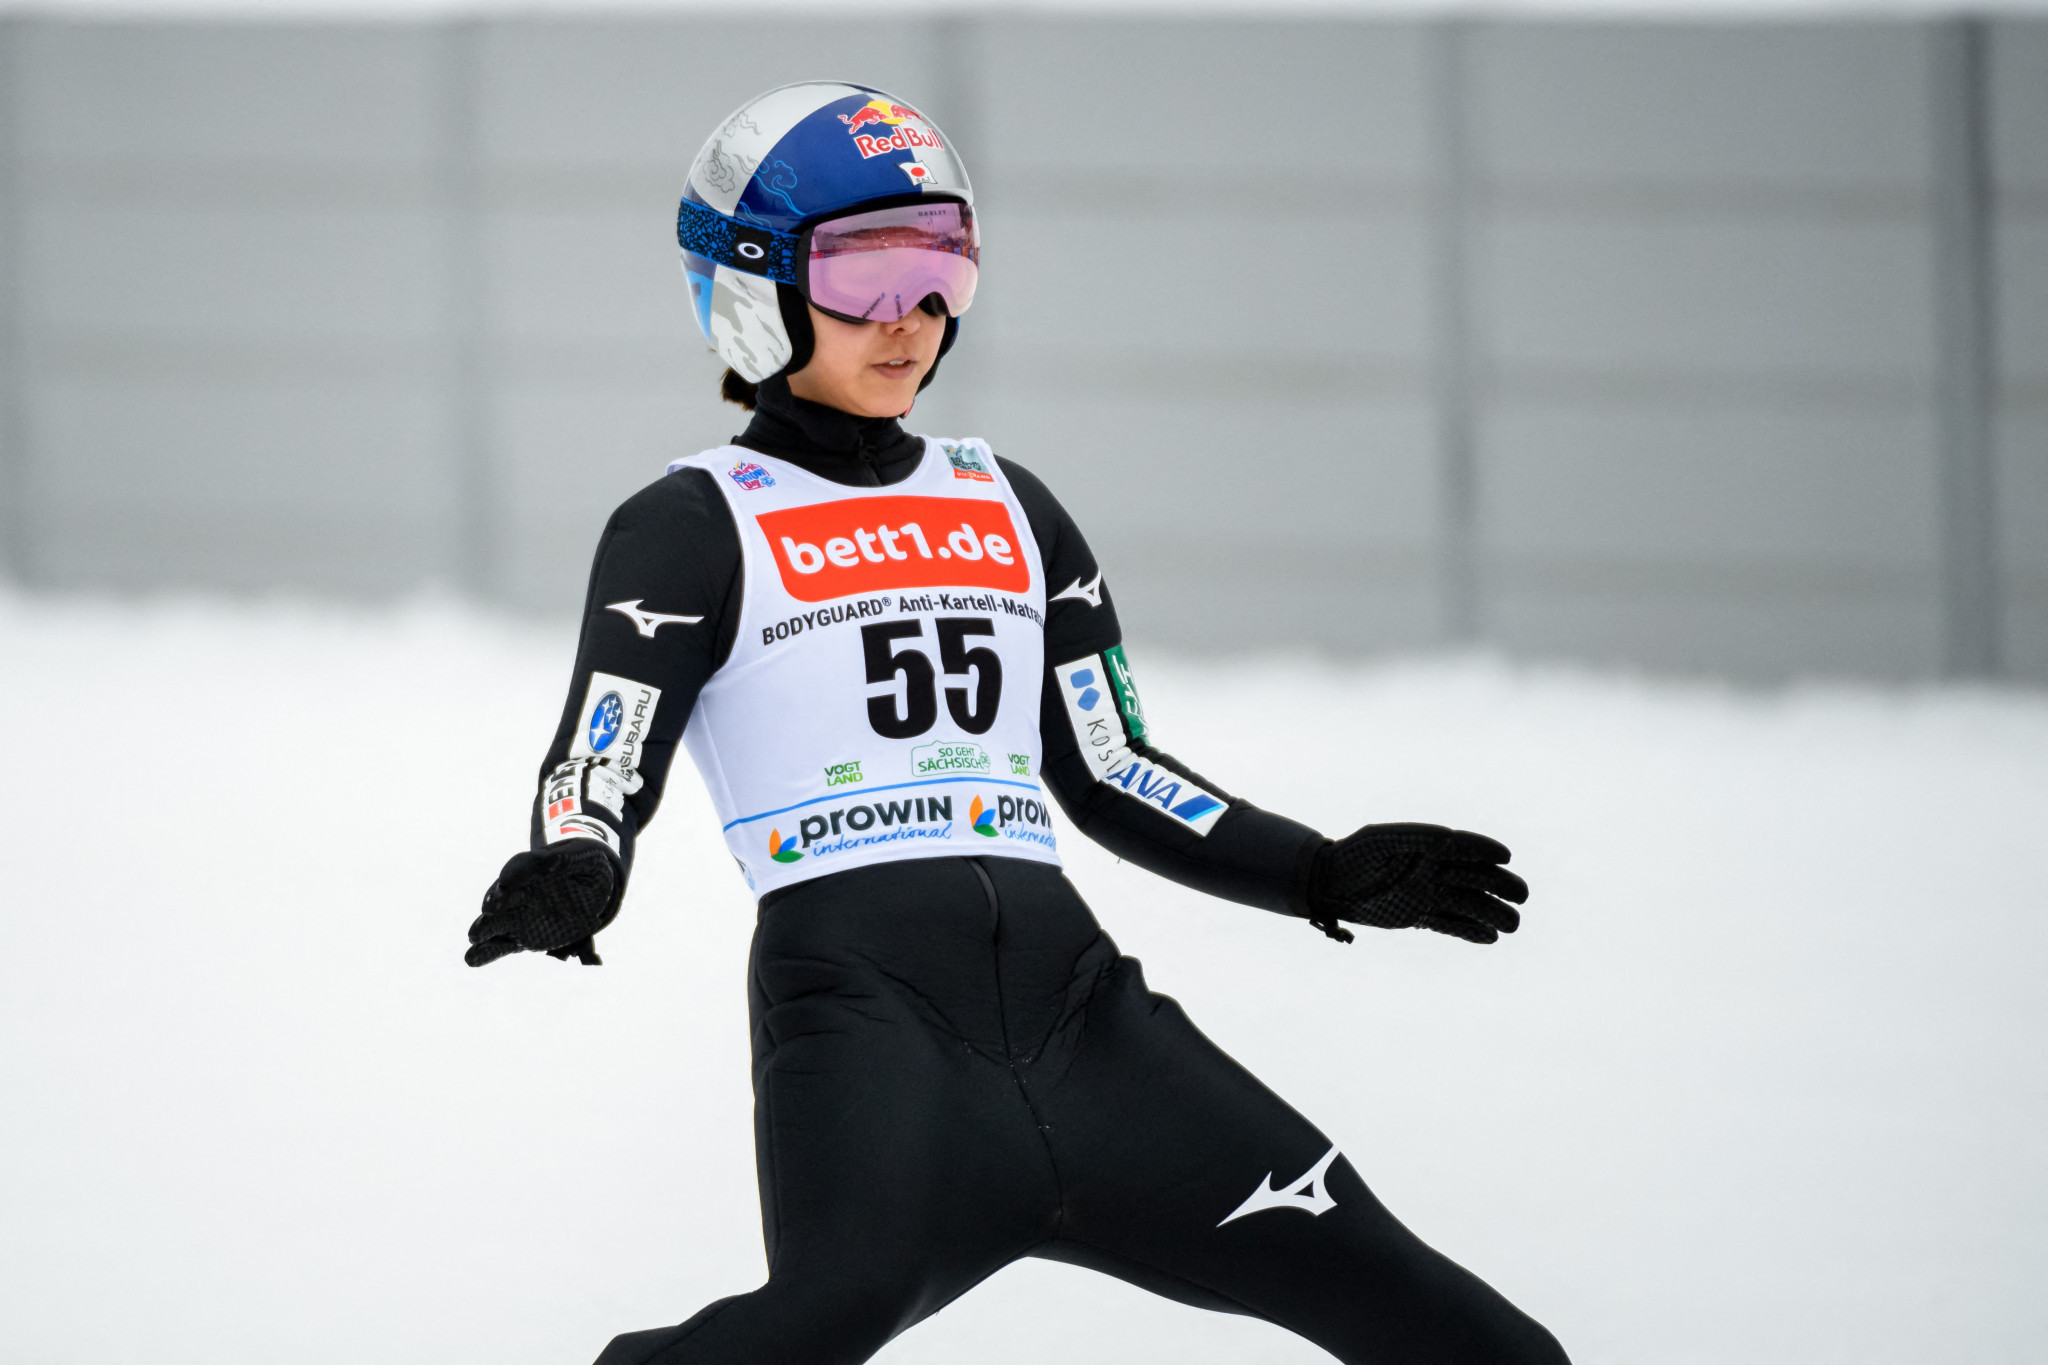 Sara Takanashi placed second in qualification in Ramsau ©Getty Images